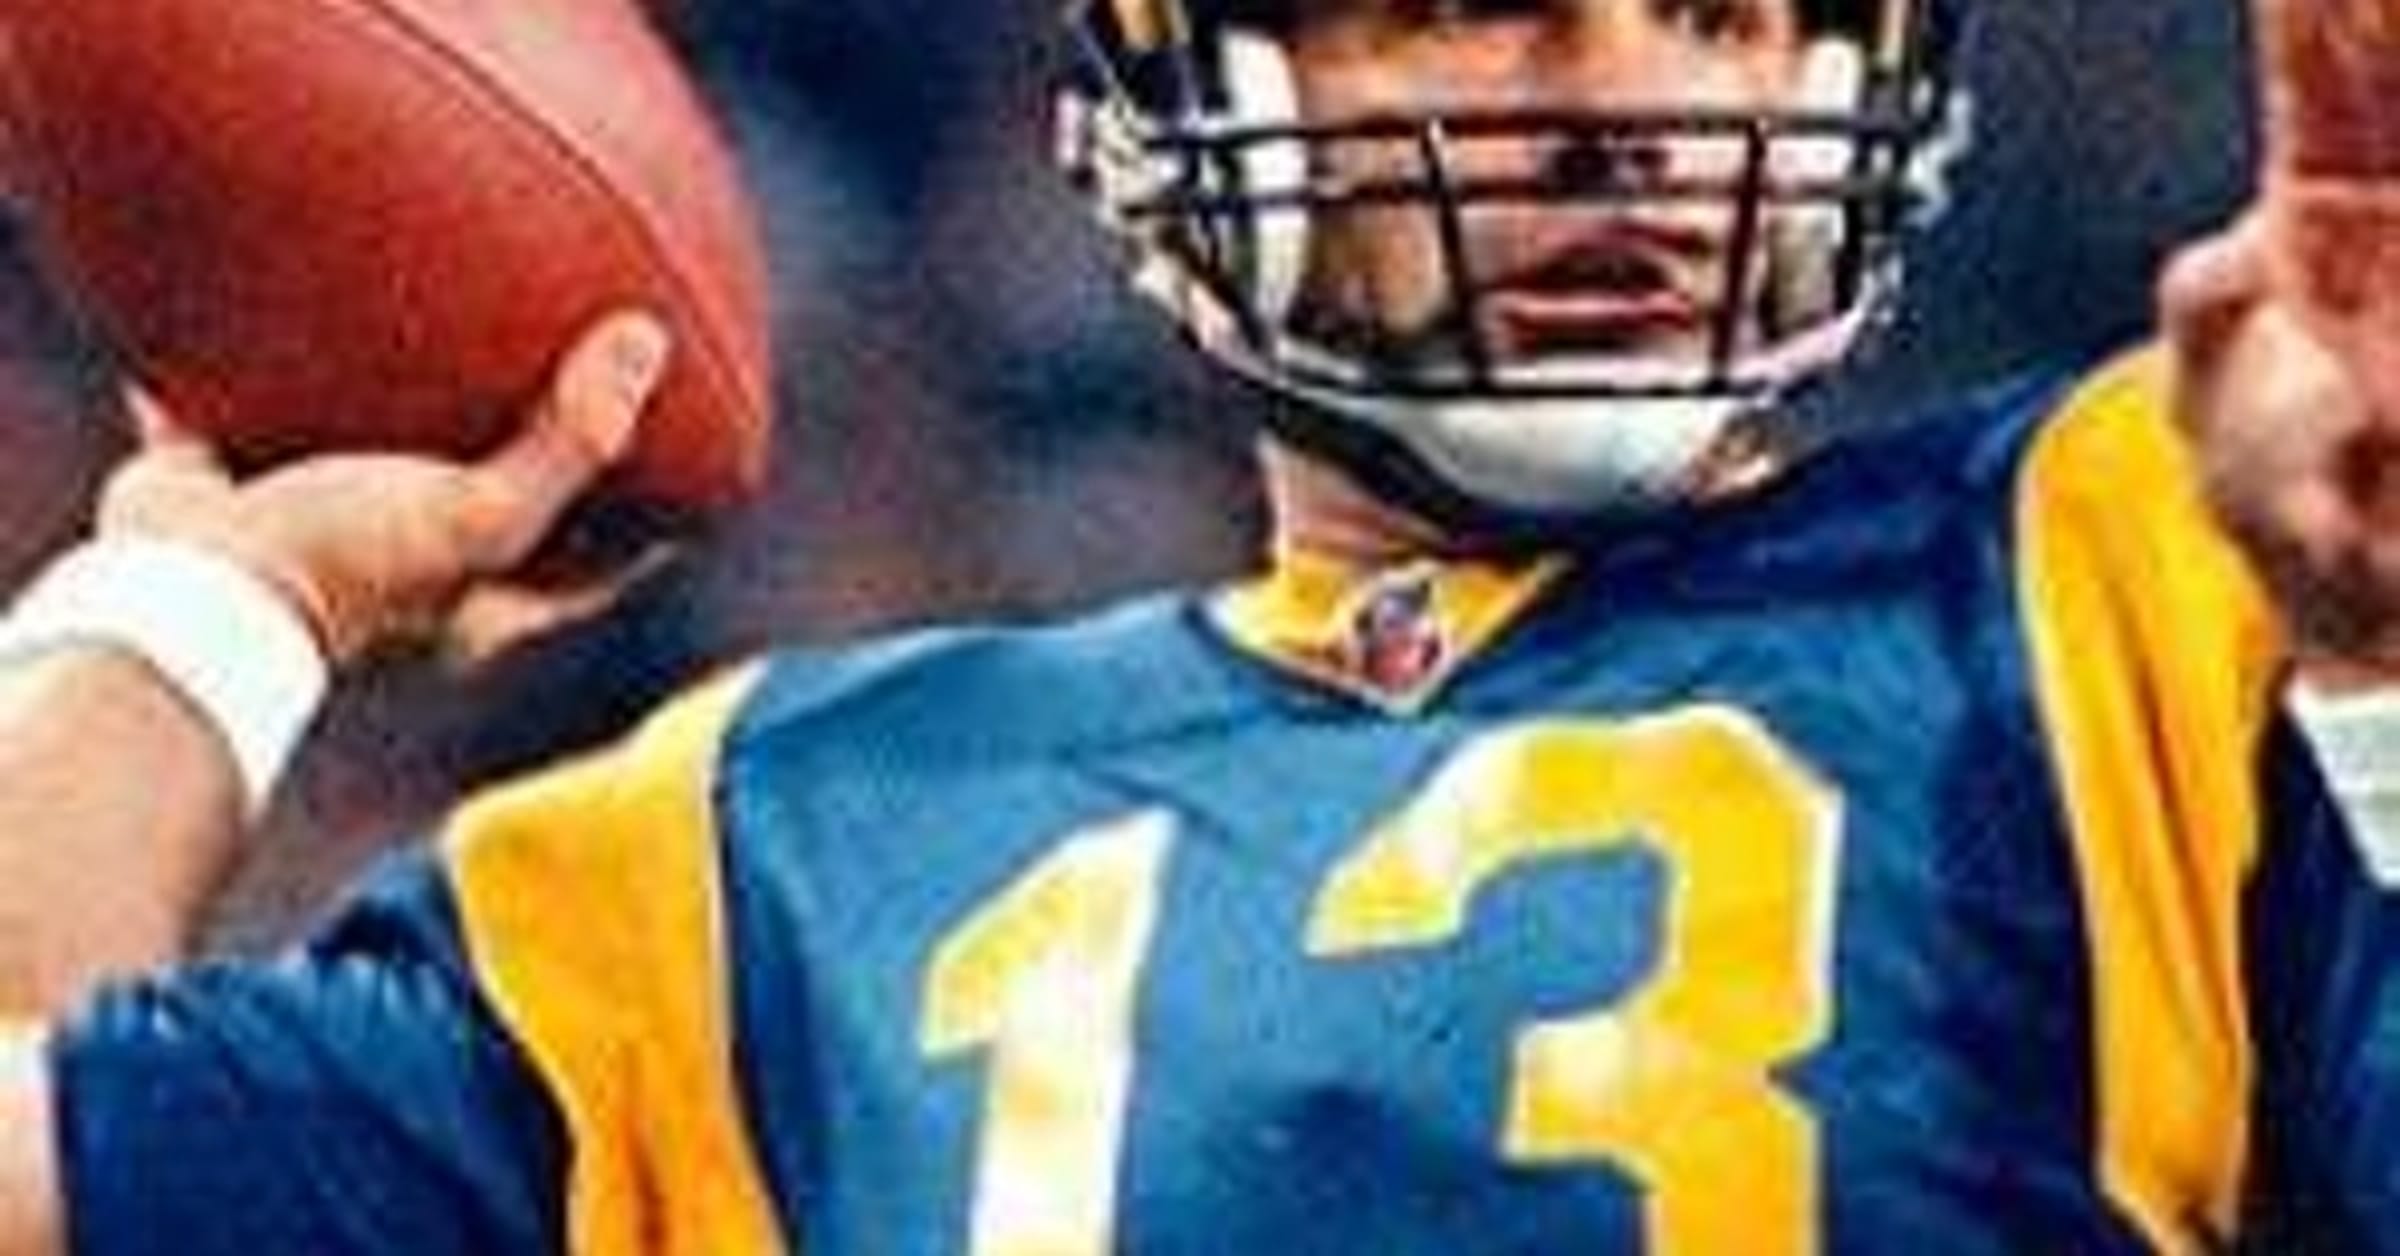 St. Louis Rams: Top 75 Greatest Players of All Time